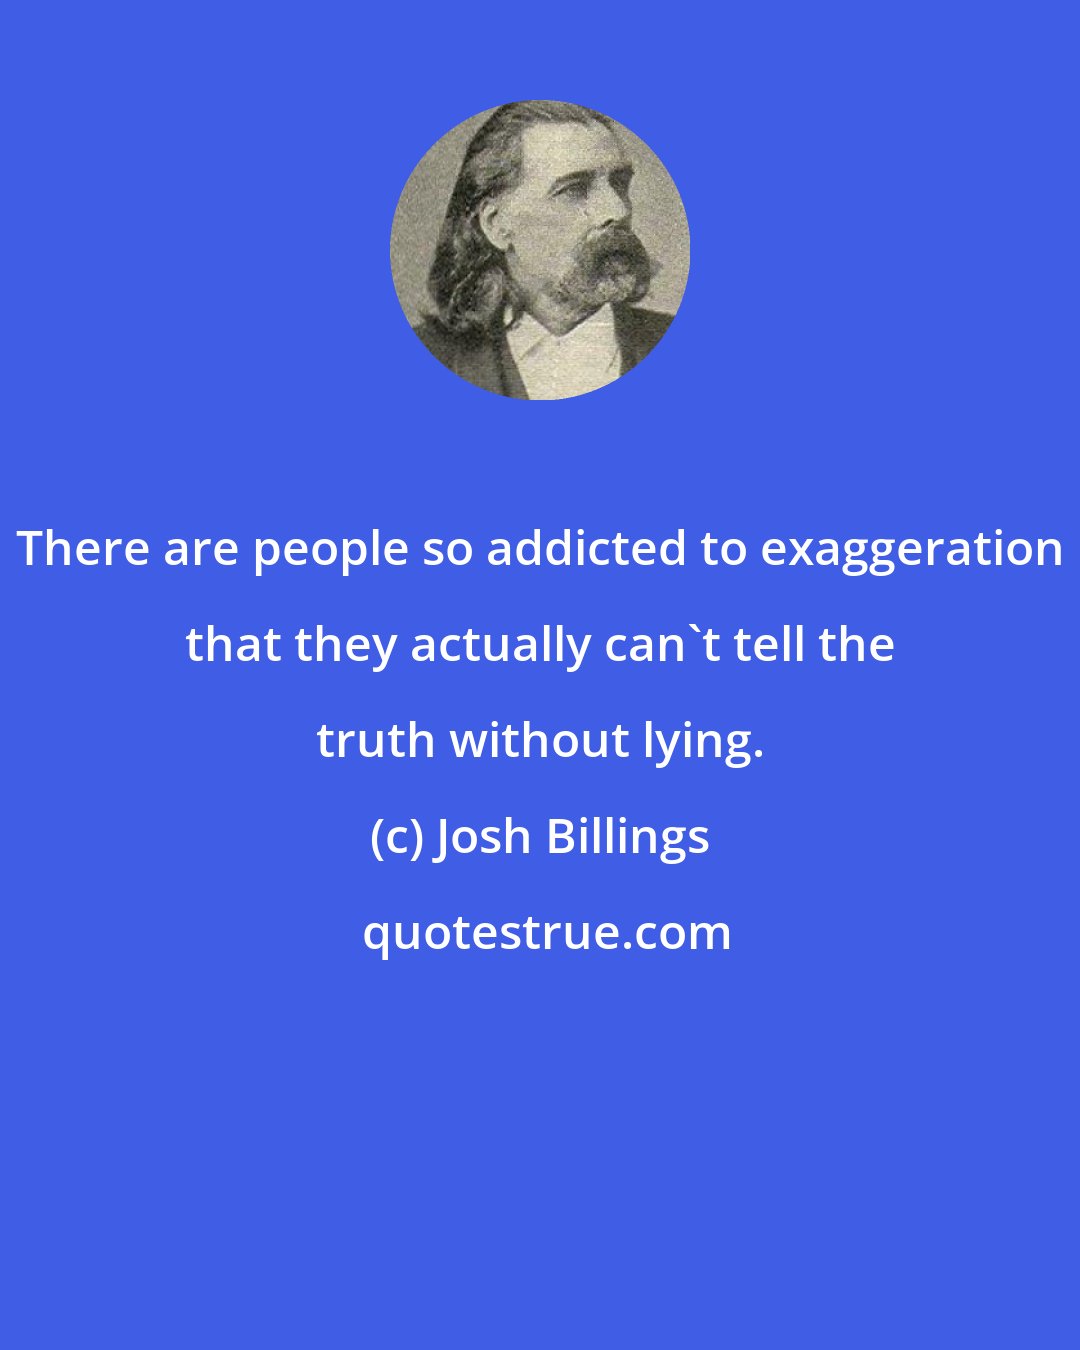 Josh Billings: There are people so addicted to exaggeration that they actually can't tell the truth without lying.